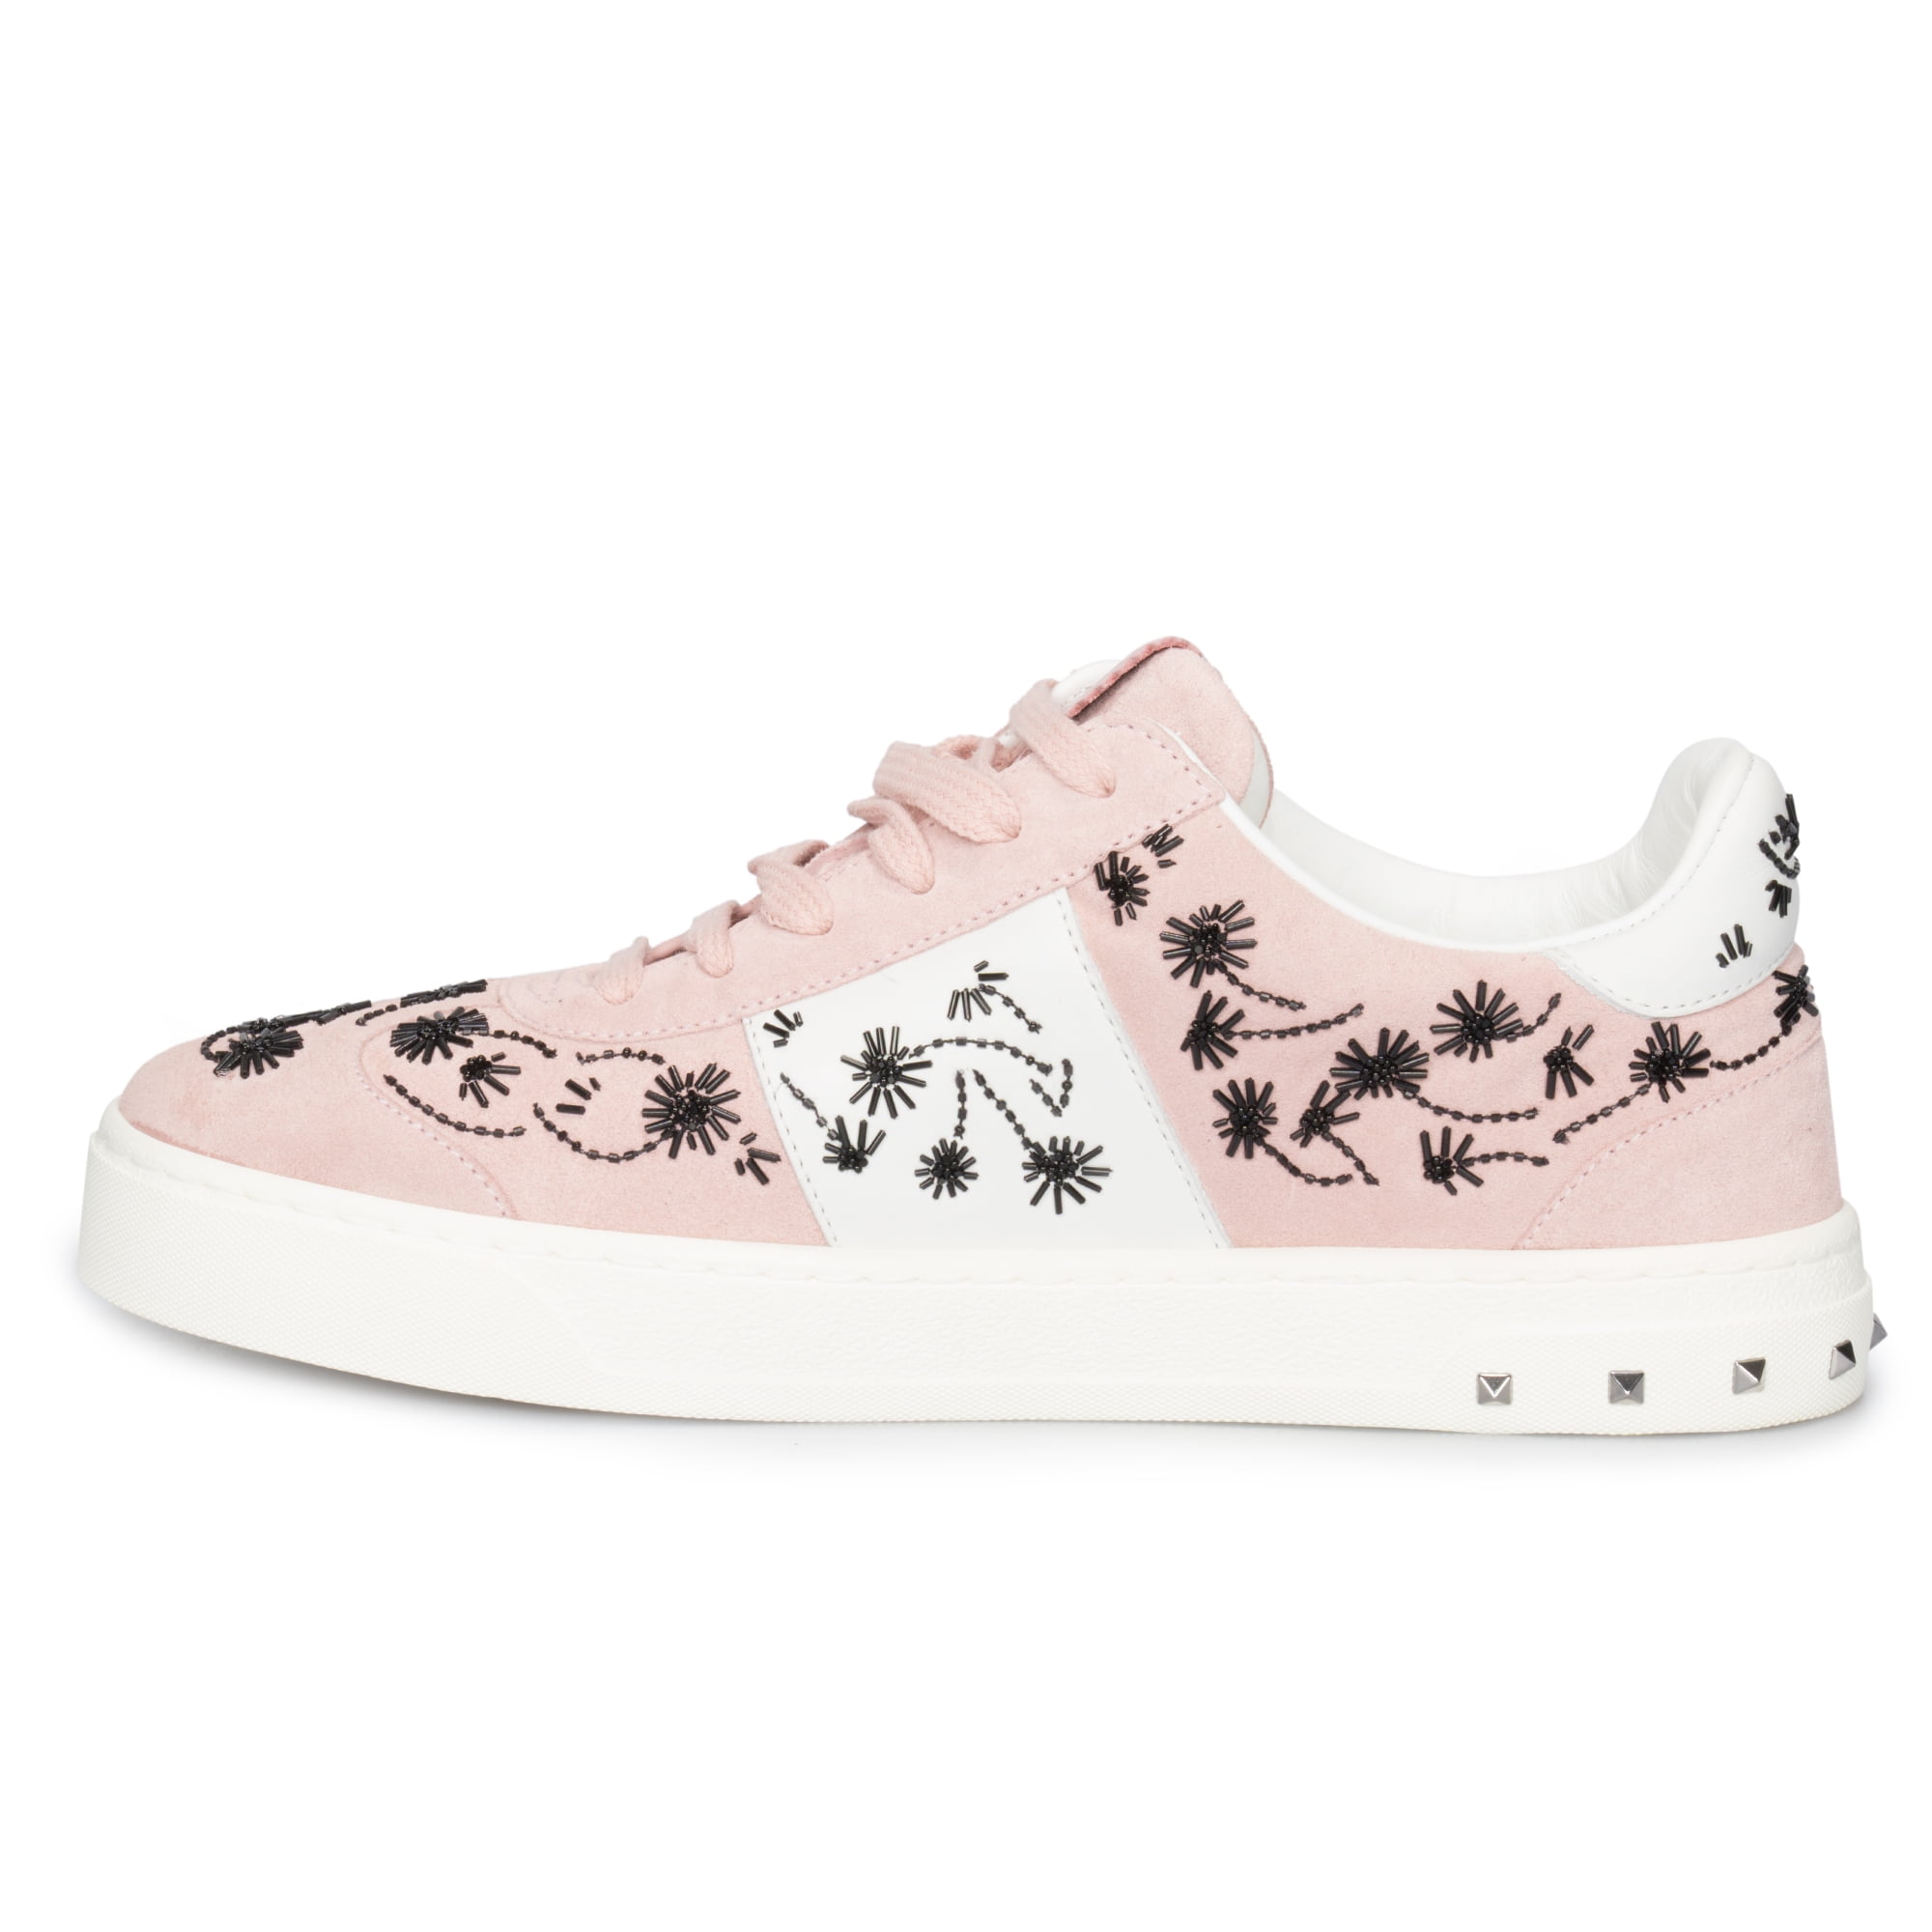 Valentino Embroidered Sneaker in Pink - Walmart.com